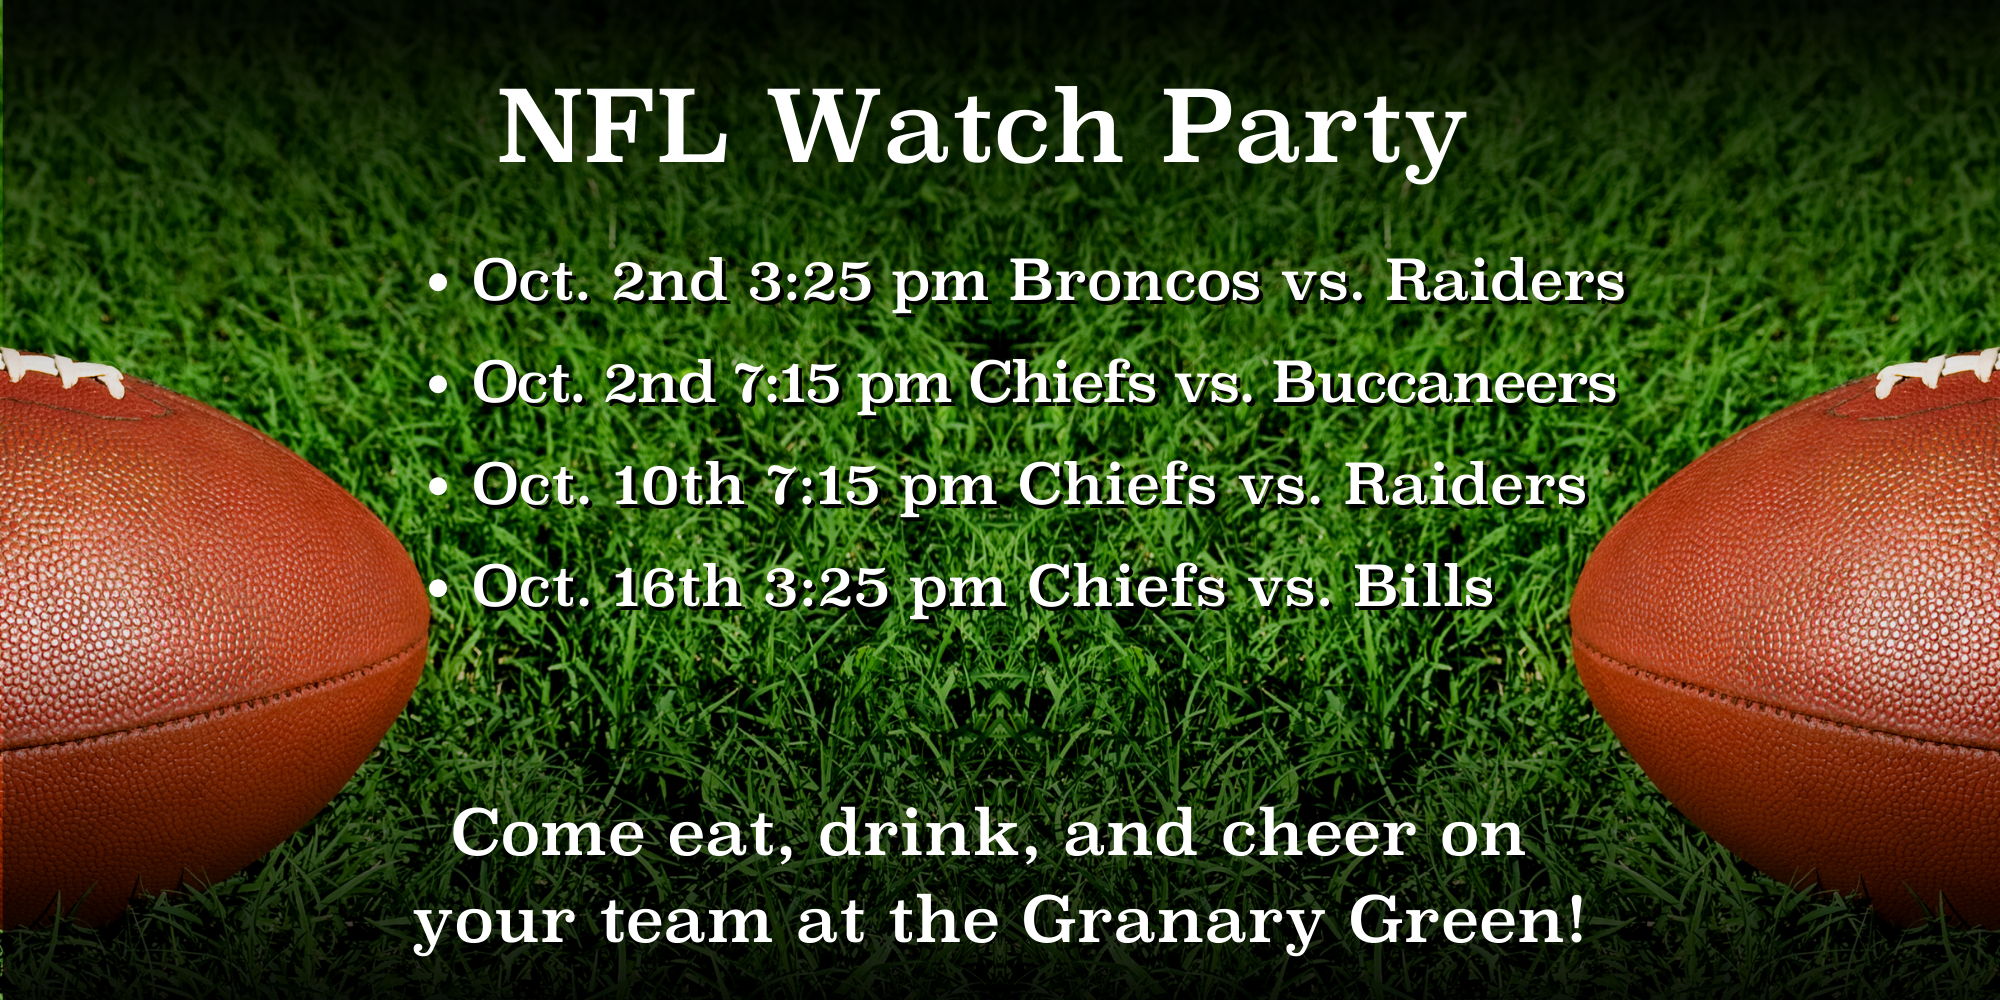 NFL Watch Party (Chiefs vs. Raiders) promotional image